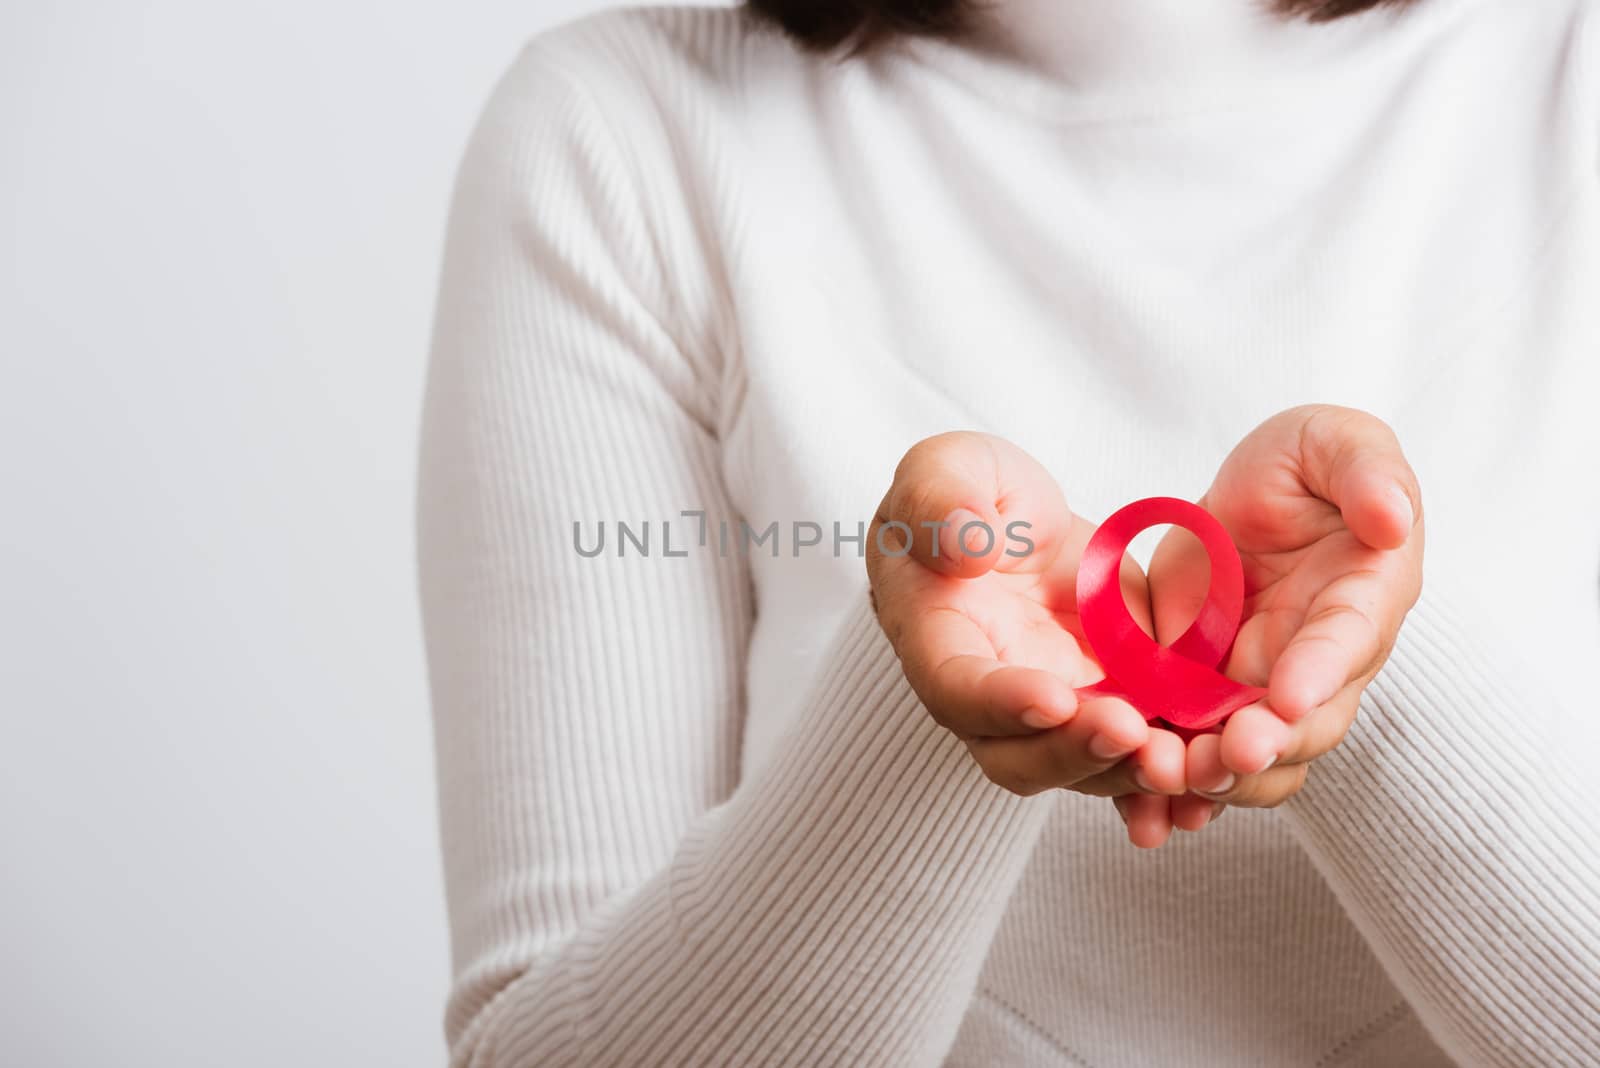 Breast cancer awareness healthcare and medicine concept. Close up Asian woman holding pink breast cancer awareness ribbon on hands treatment charity, studio shot isolated on white background